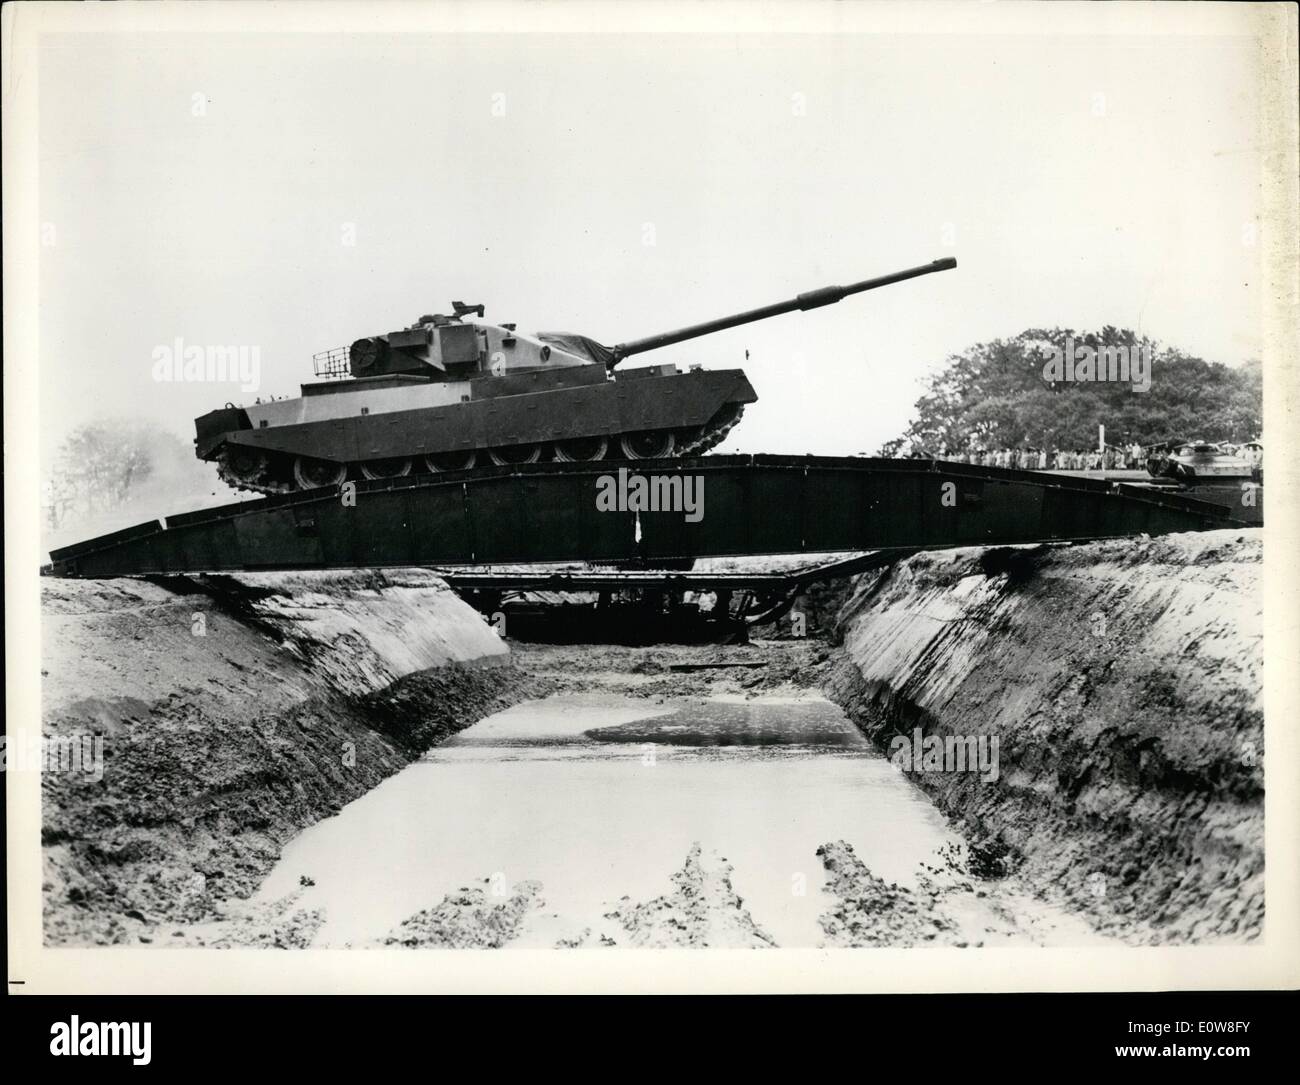 Nov. 11, 1961 - Tank Lays Bridge For New Tank: Two pictures from the British Army's Fighting Vehicles Research and Development Establishment, Chobham, England, show Britain's latest tank and a bridge laying tank. Pictured here is the 45-long-ton Chieftain, Britain's most up-to-date tank, recently taken from the secrete list, crossing a bridge laid for it by another tank, claimed to be the world's most powerful tank, the Chieftain fires a high-velocity cannon and runs on diesel fuel, high-octanes gas or Kerosene. Stock Photo